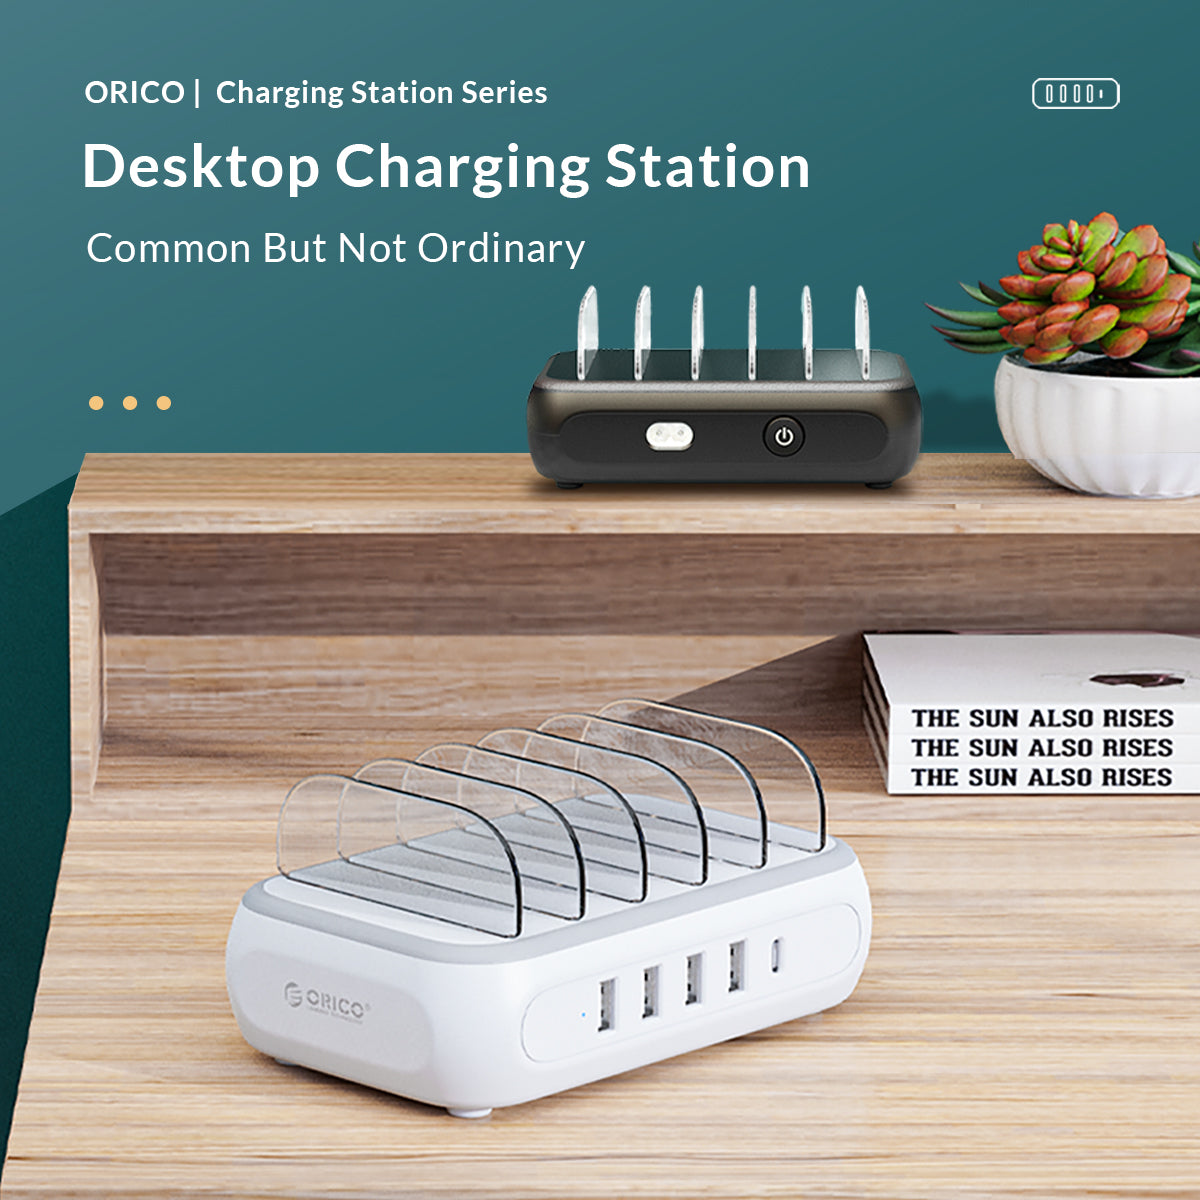 Orico Mobile Phone Charger Station 5Port 10A APD-4U1C